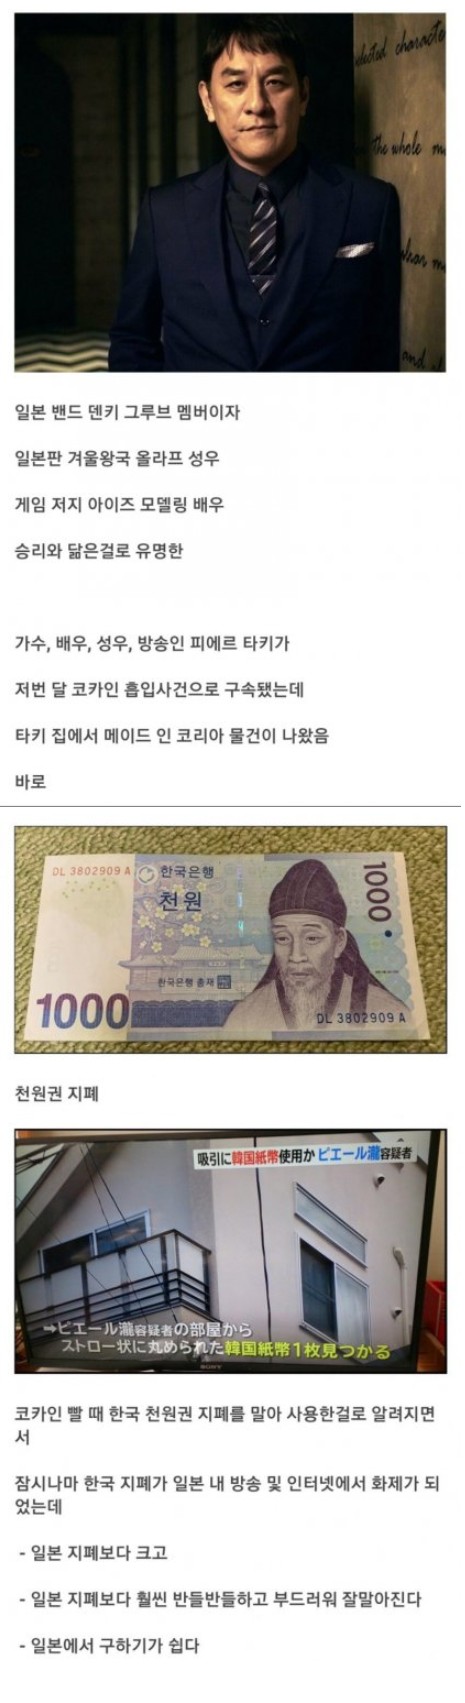 The Korean bill feat. Big Bang Seungri's face, which became a hot topic in Japan.